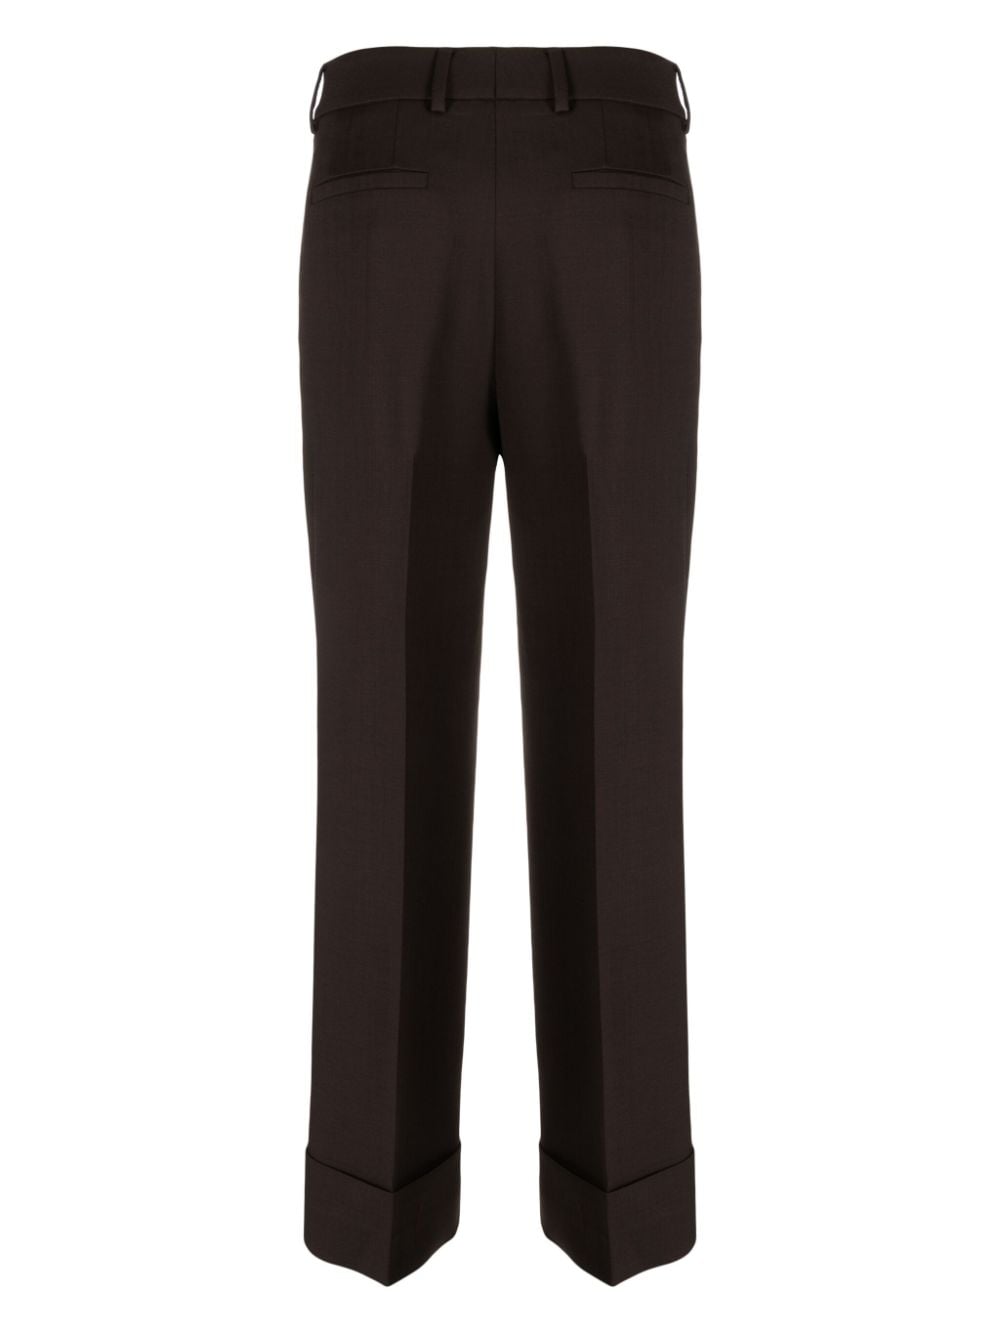 TROUSERS - Clothing - WOMEN